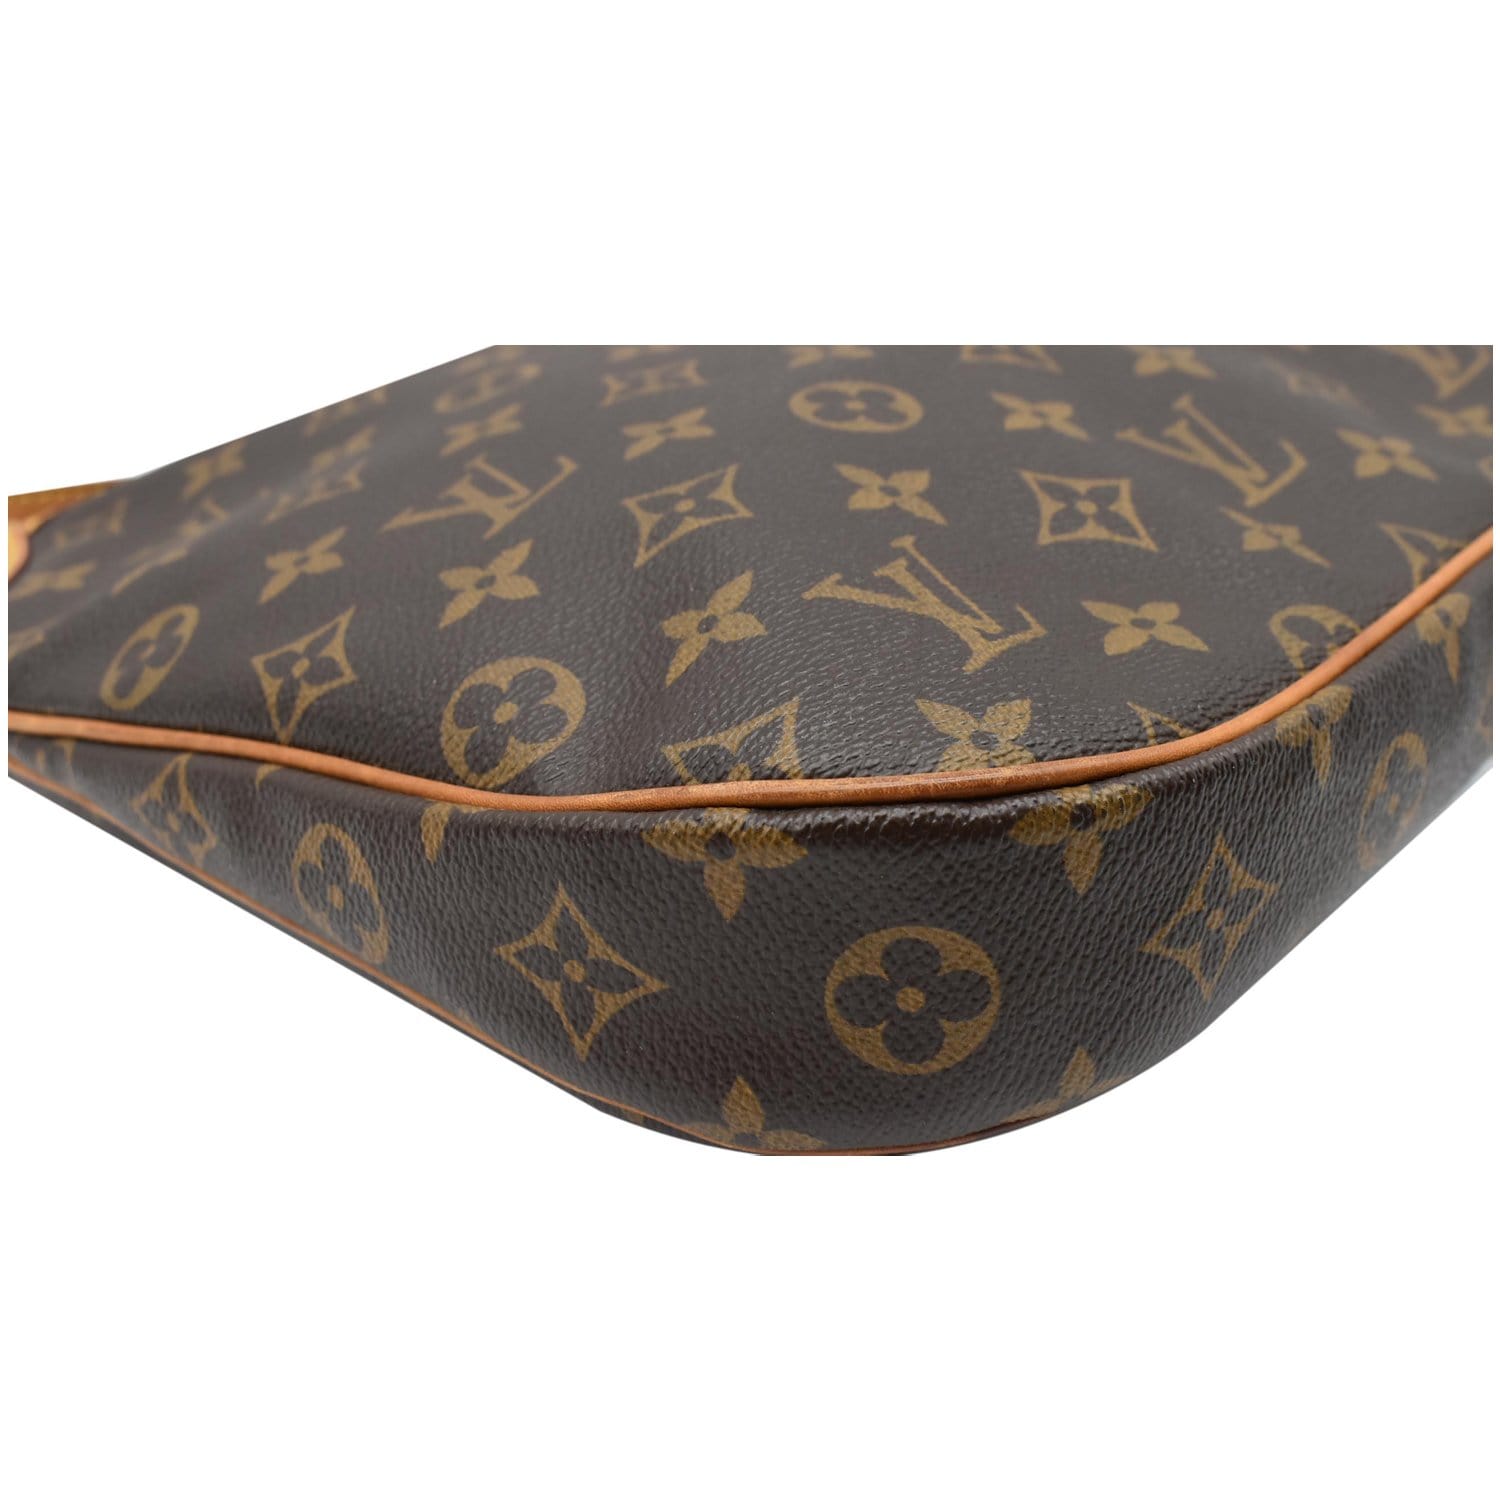 Louis Vuitton Pre-Owned Brown Monogram Odeon PM Canvas Crossbody Bag, Best  Price and Reviews